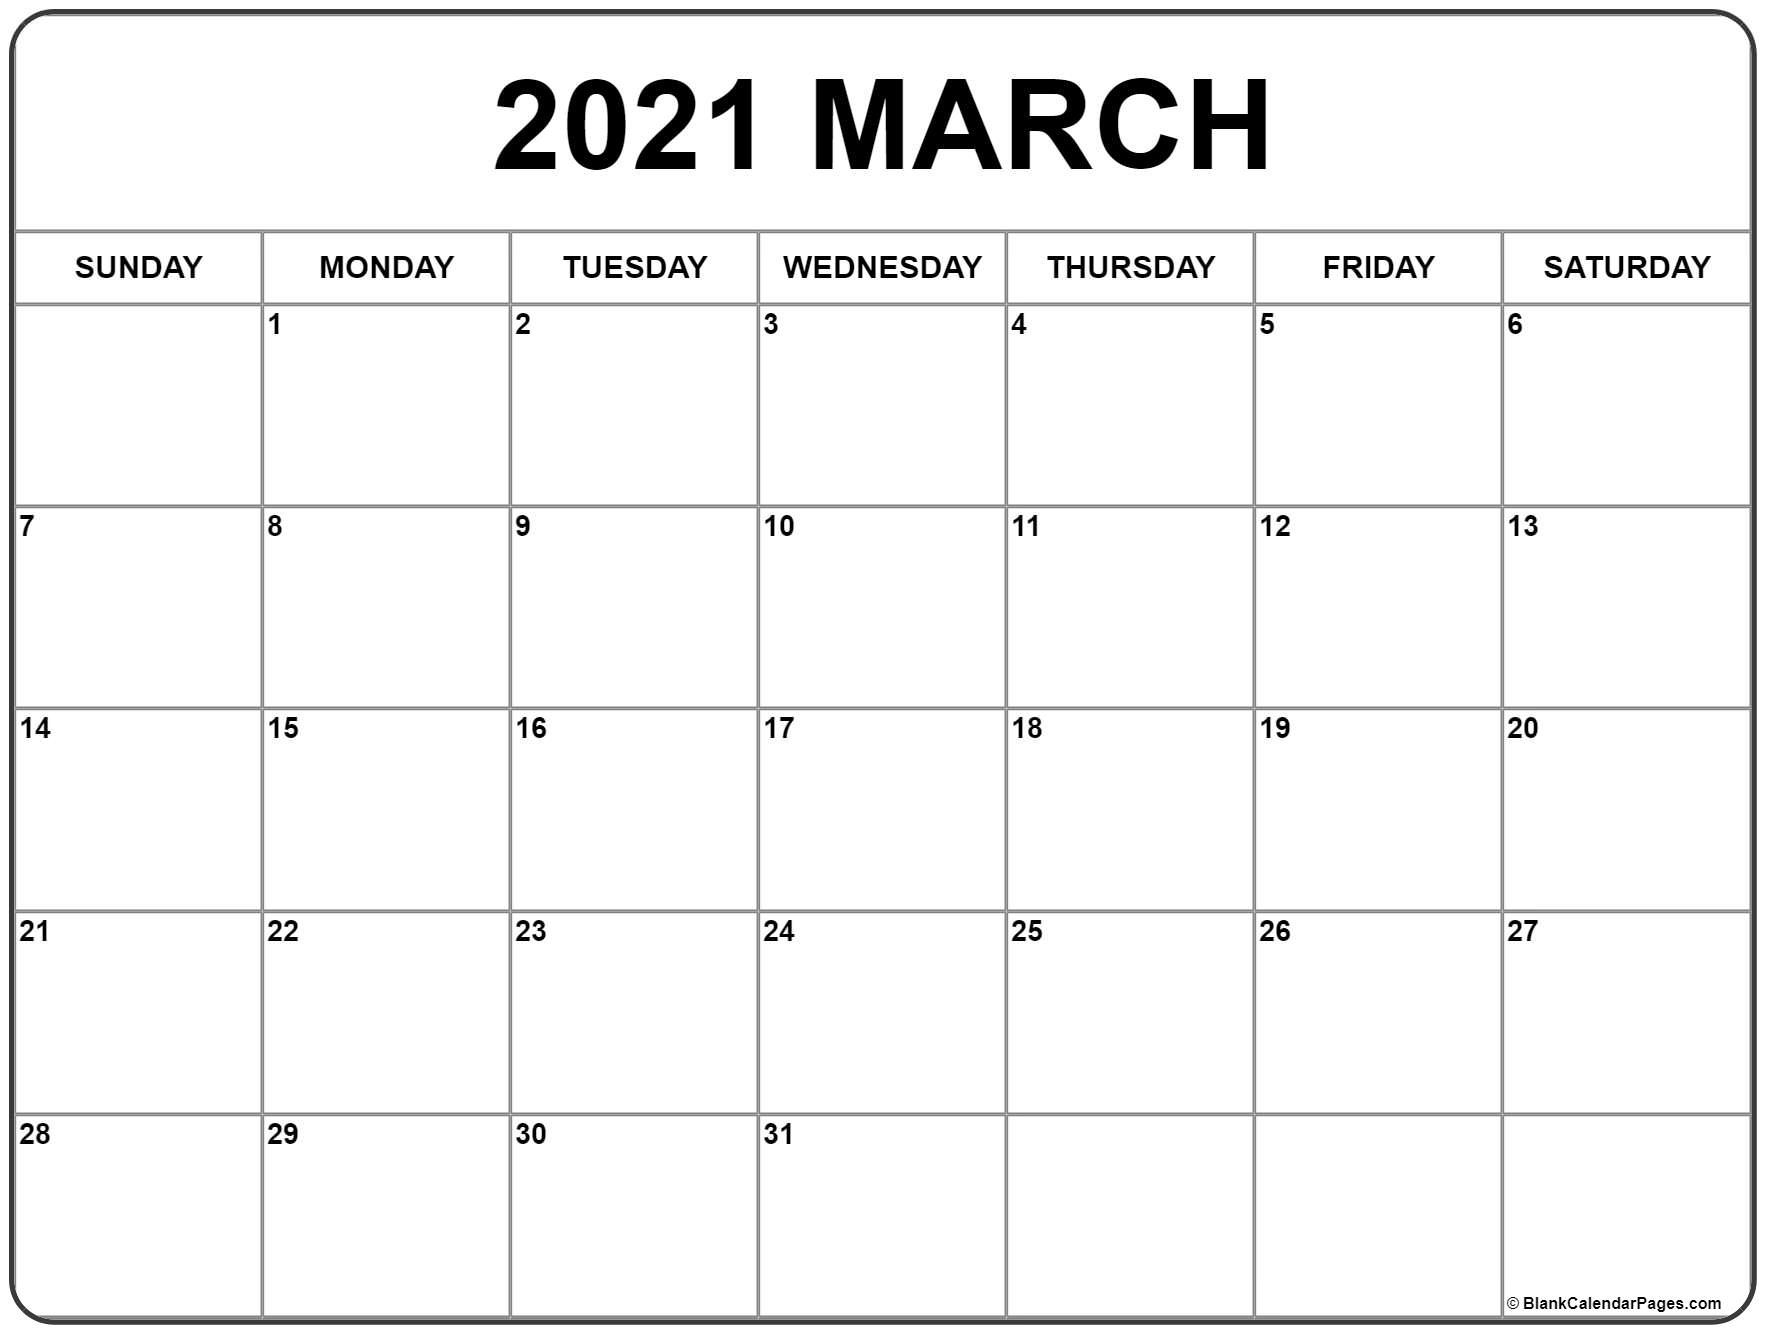 march 2021 calendar | free printable monthly calendars